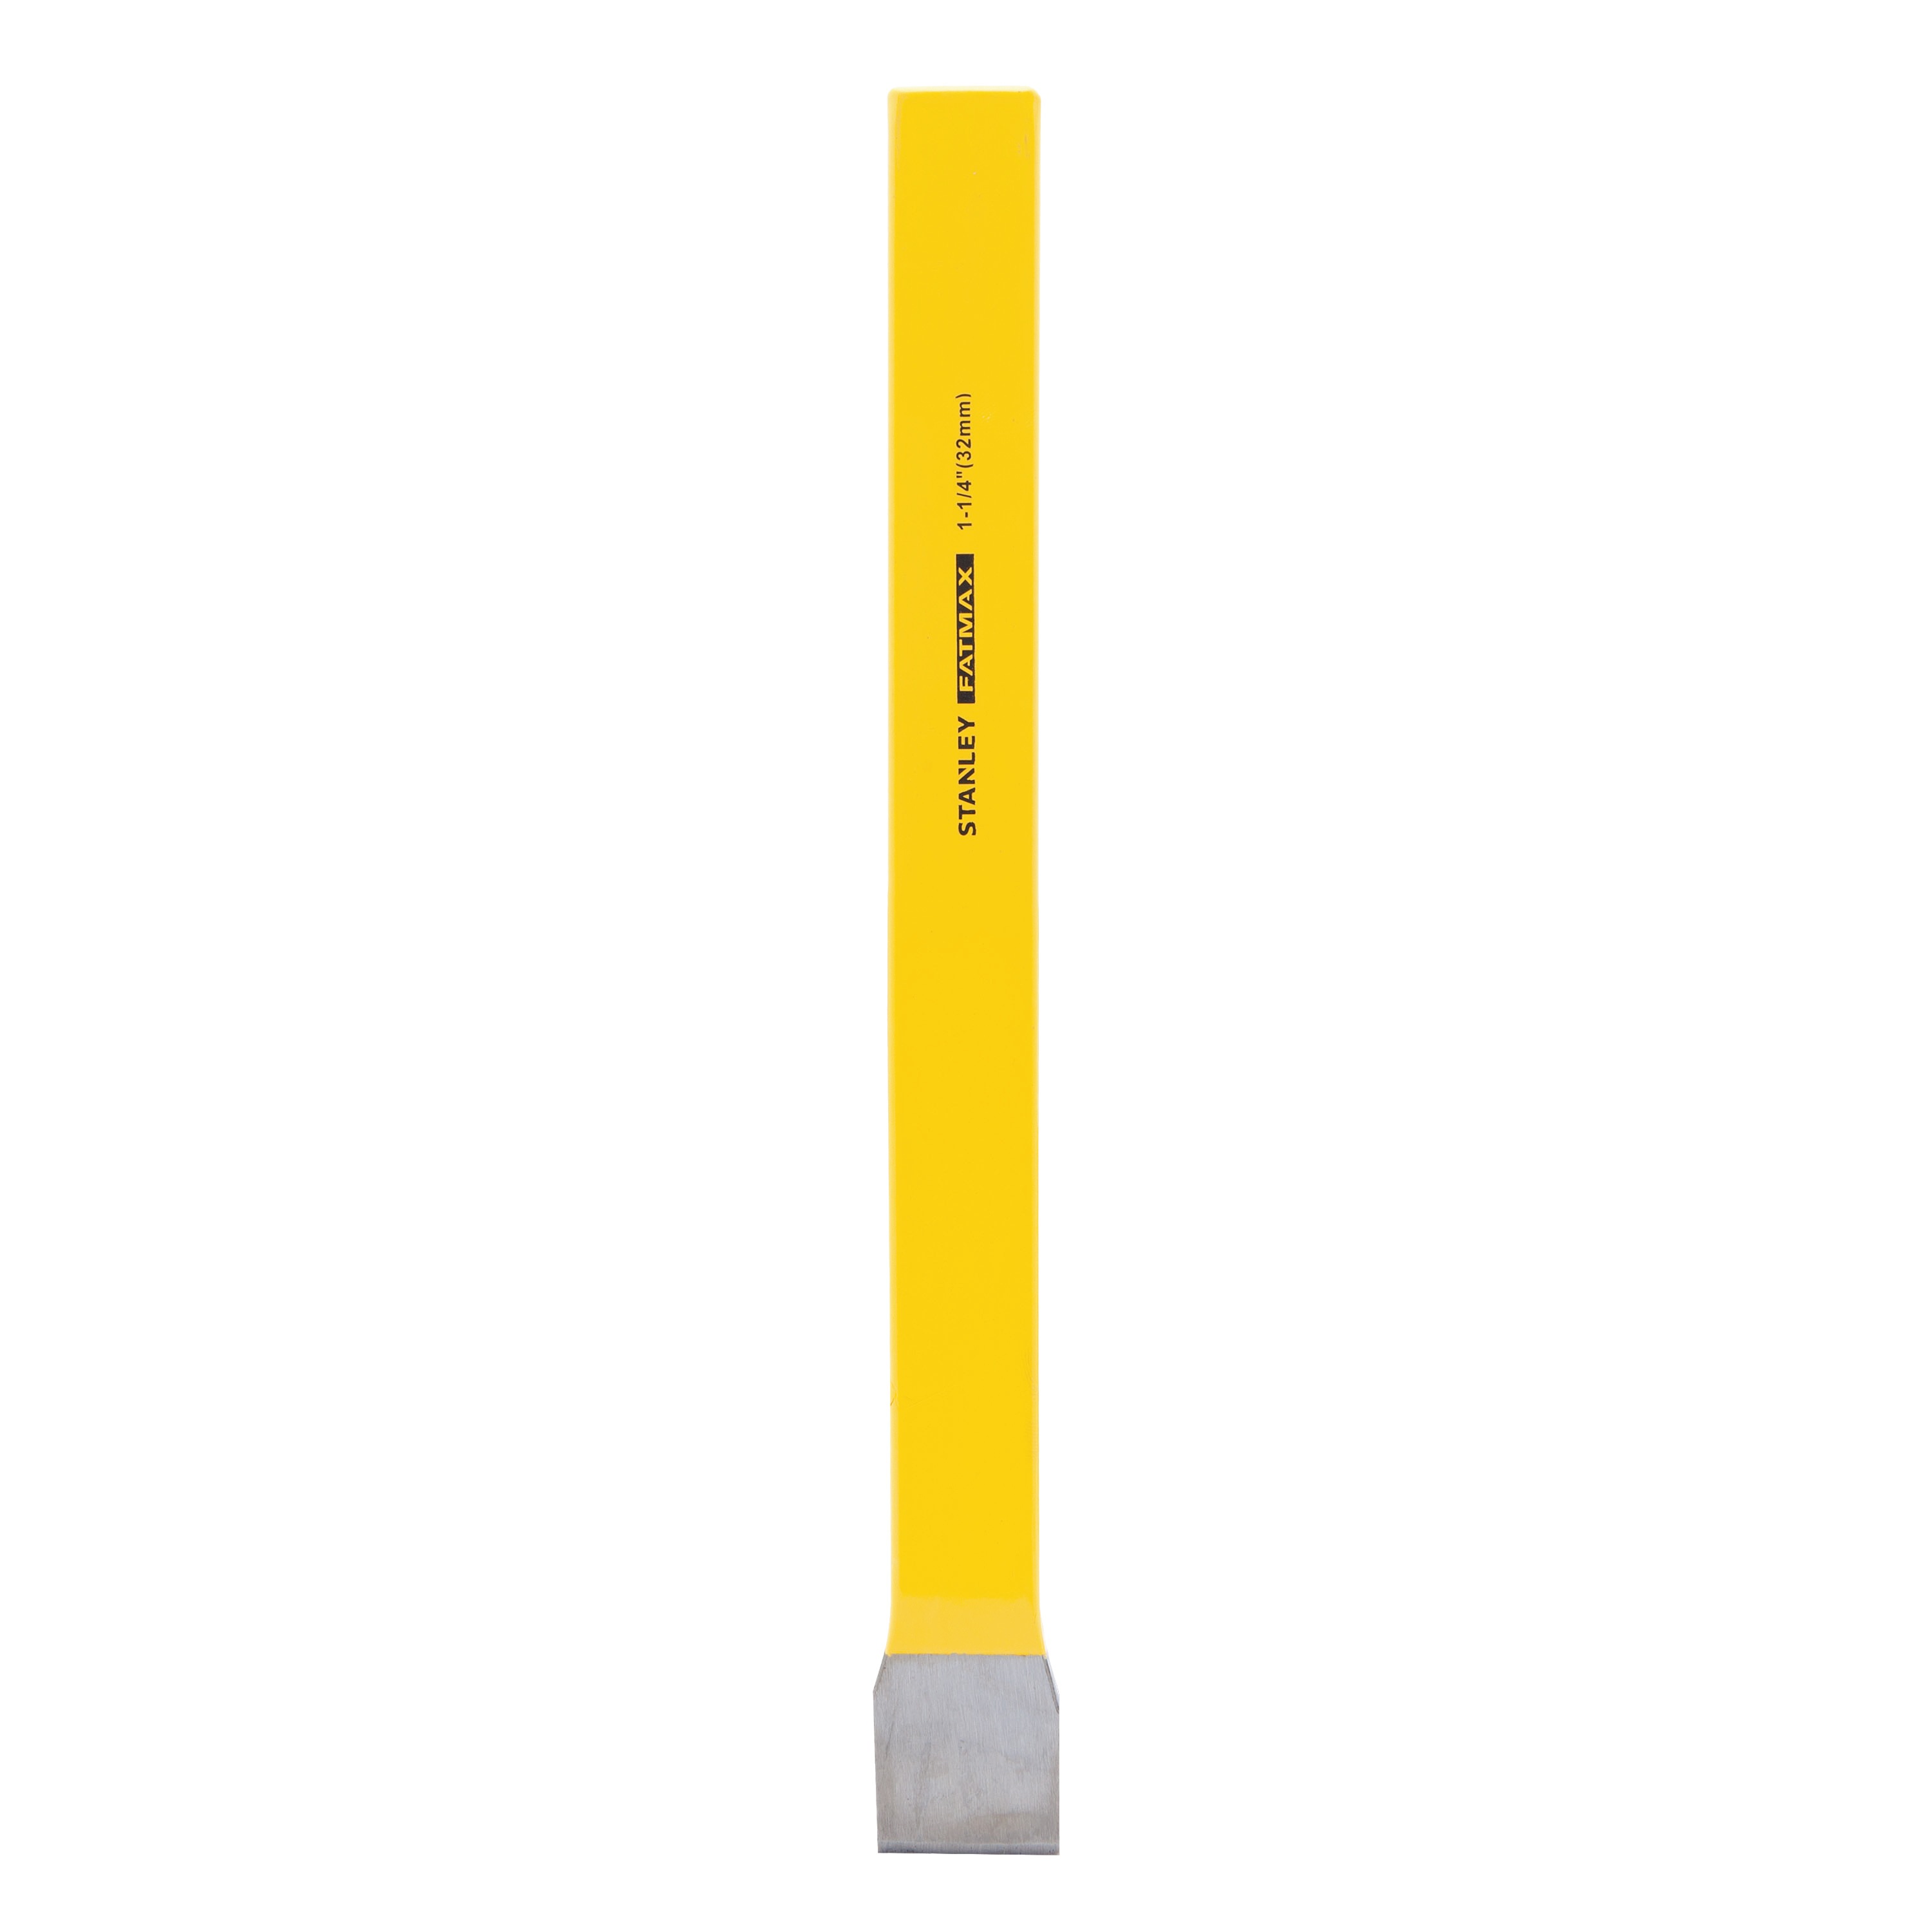 Stanley Tools - 114 in FATMAX Flat Utility Chisel - FMHT16556